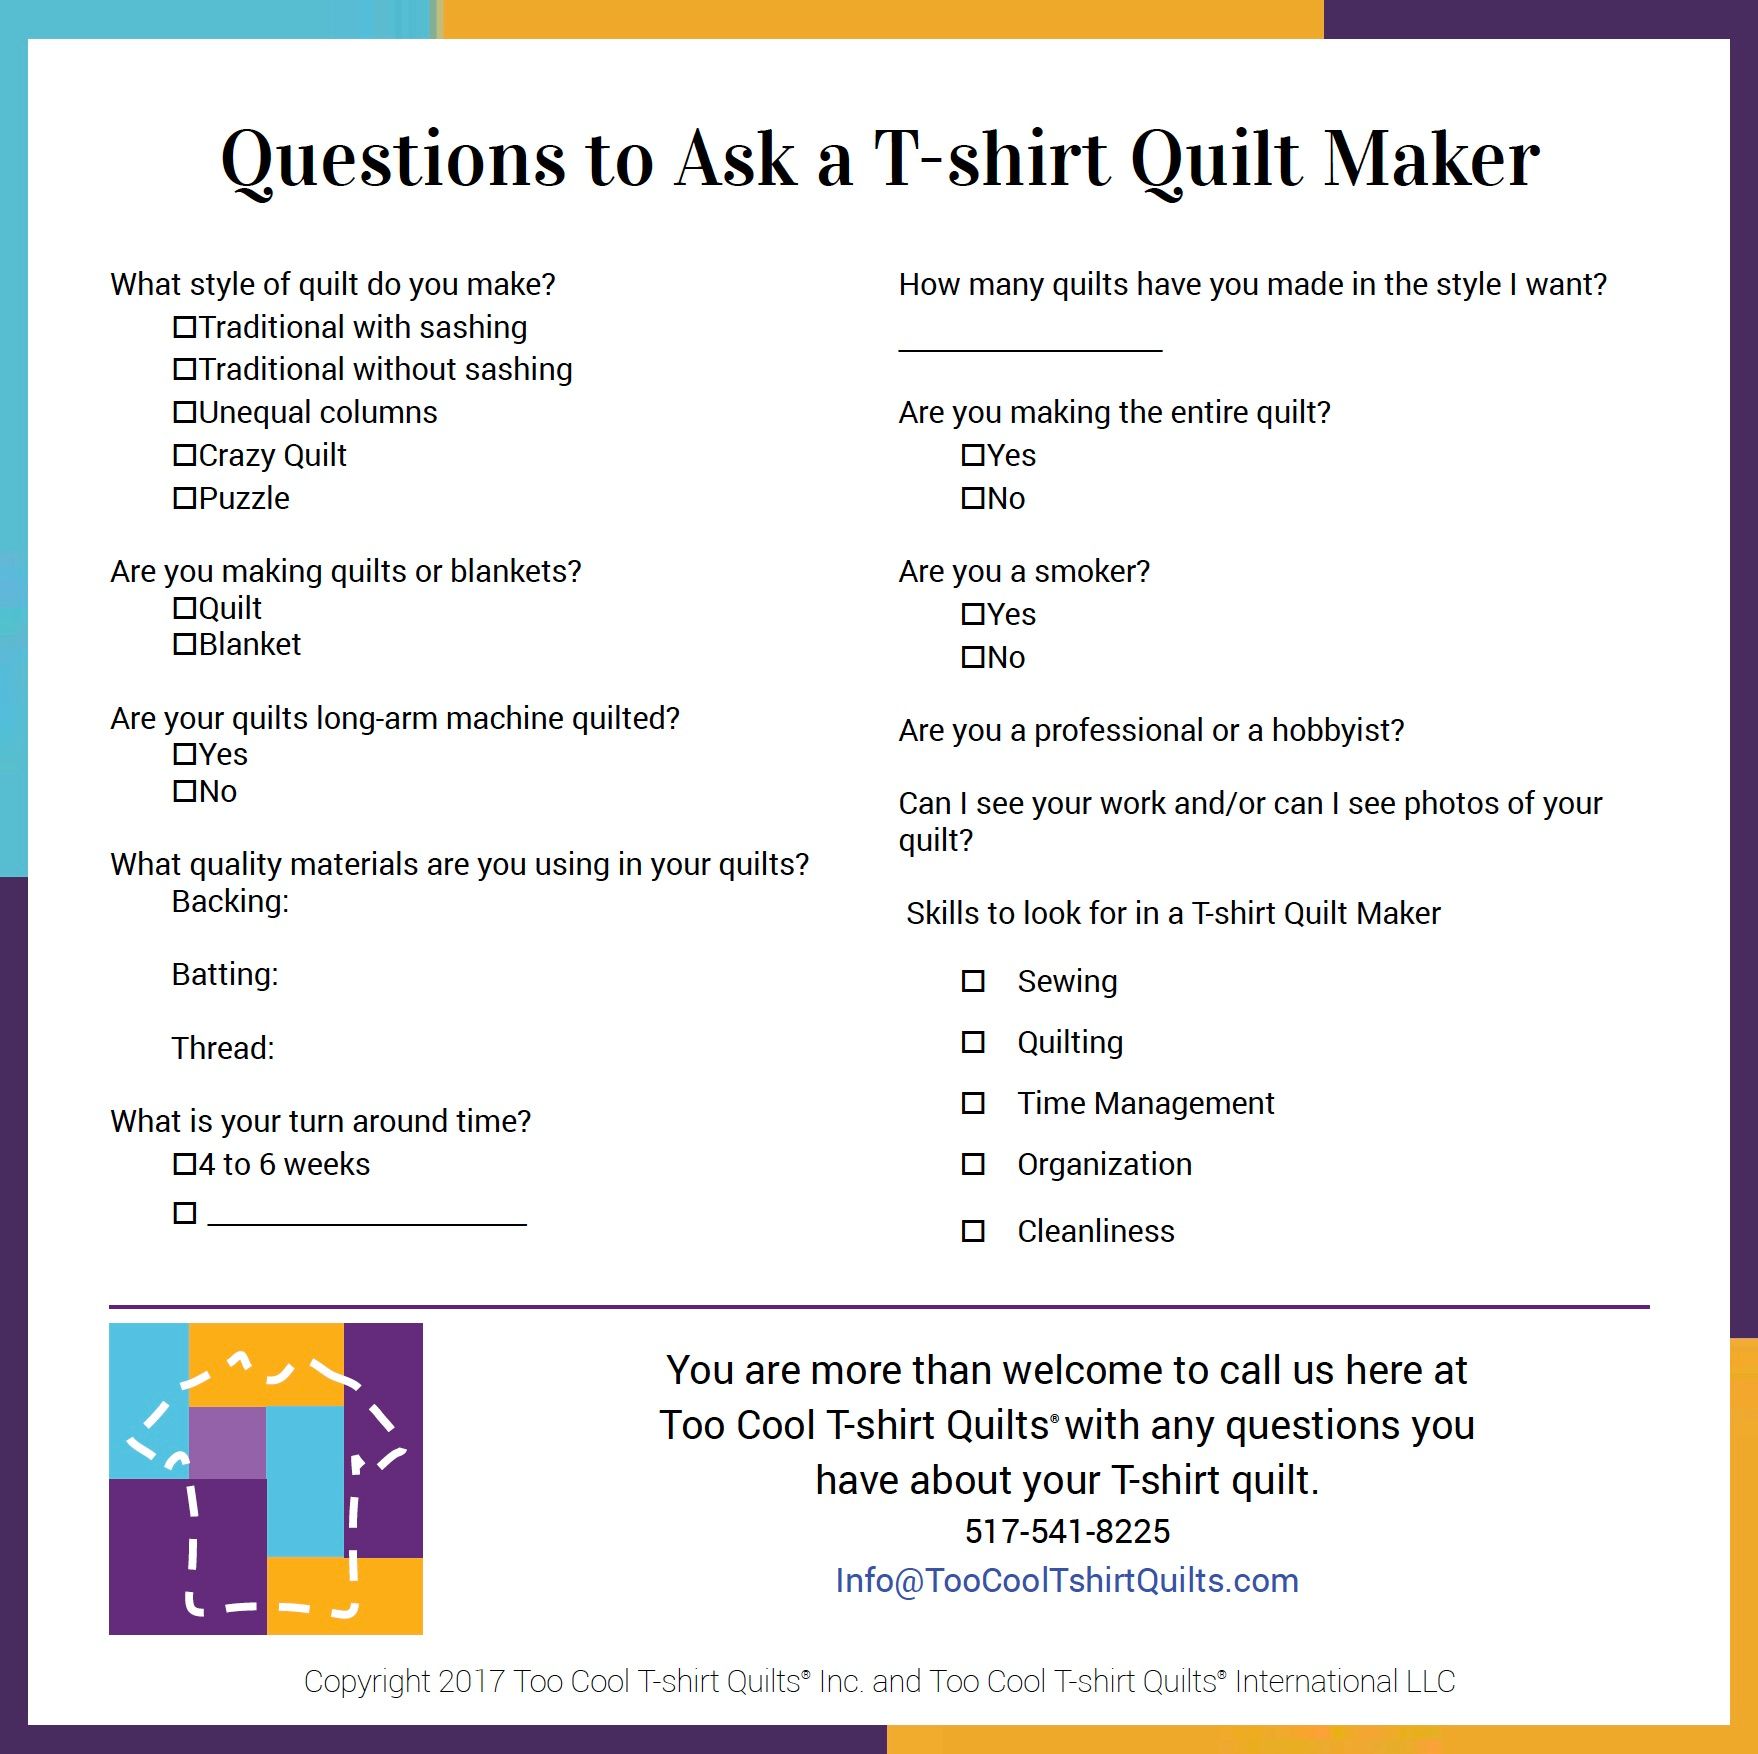 Interview Questions to ask a T-shirt quilt maker